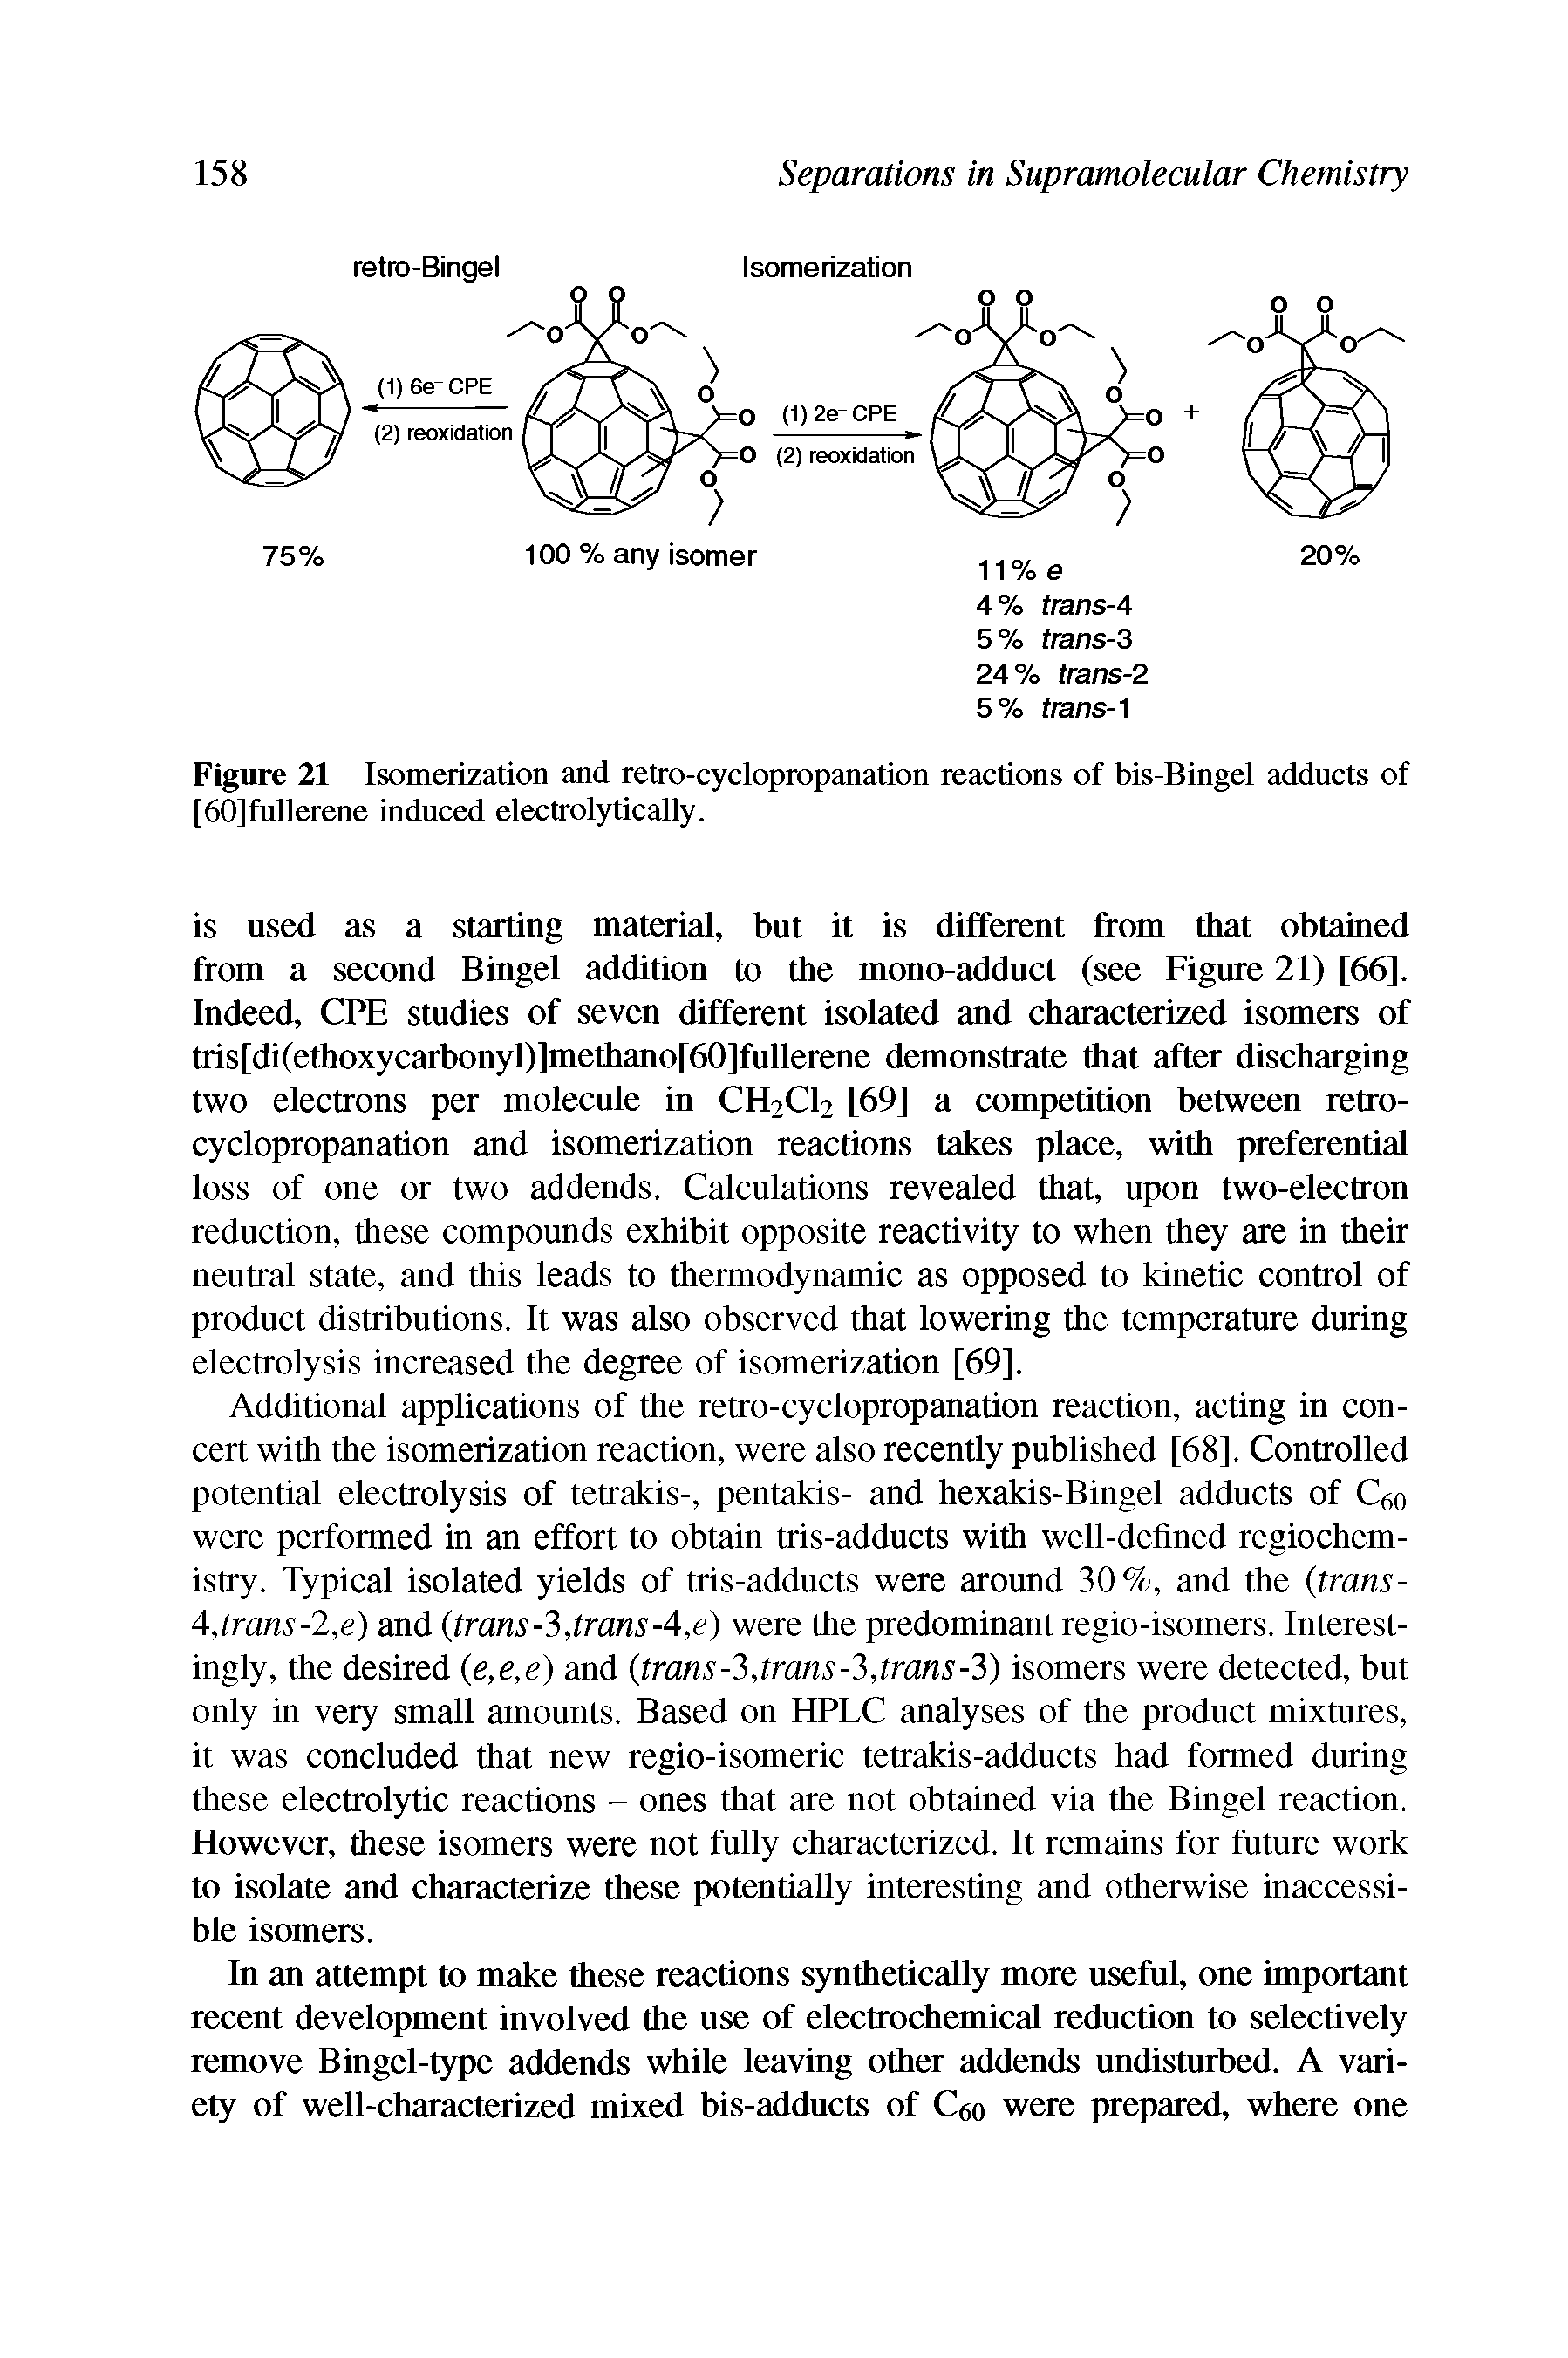 Figure 21 Isomerization and retro-cyclopropanation reactions of bis-Bingel adducts of [60]fullerene induced electrolytically.